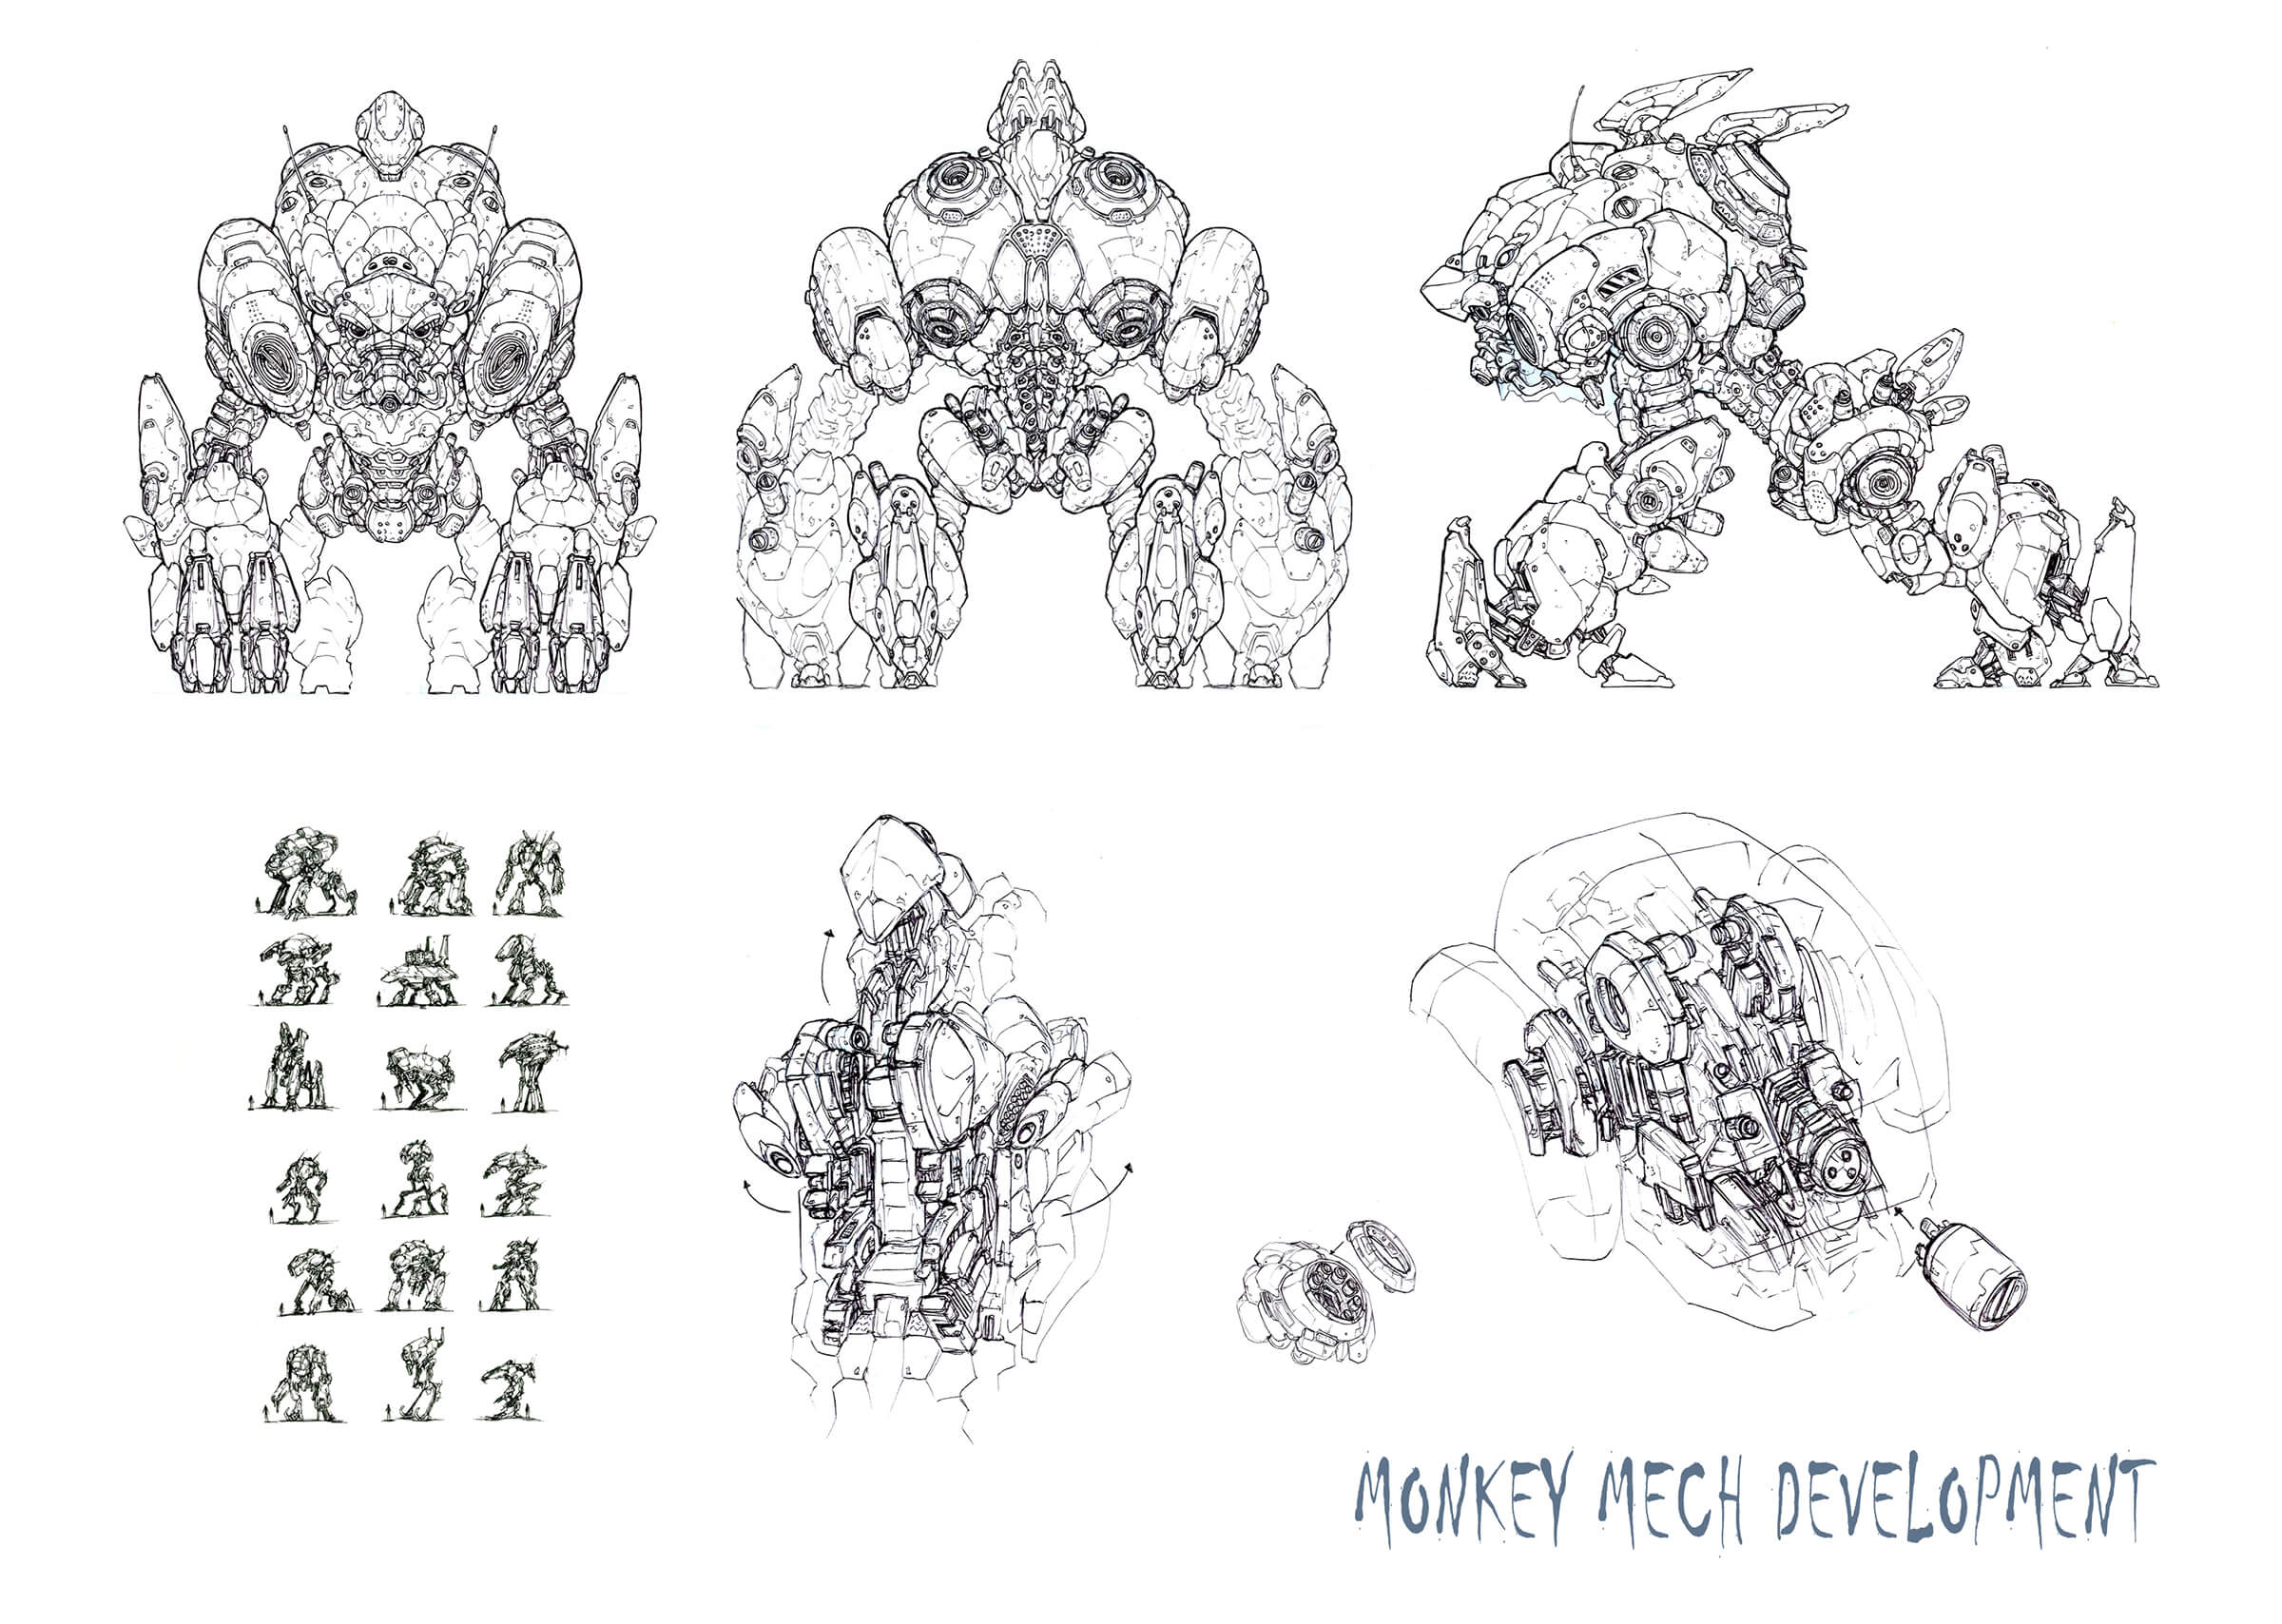 Black-and-white concept sketches and cross-sections of a hulking, quadrupedal mech machine in various resting poses.